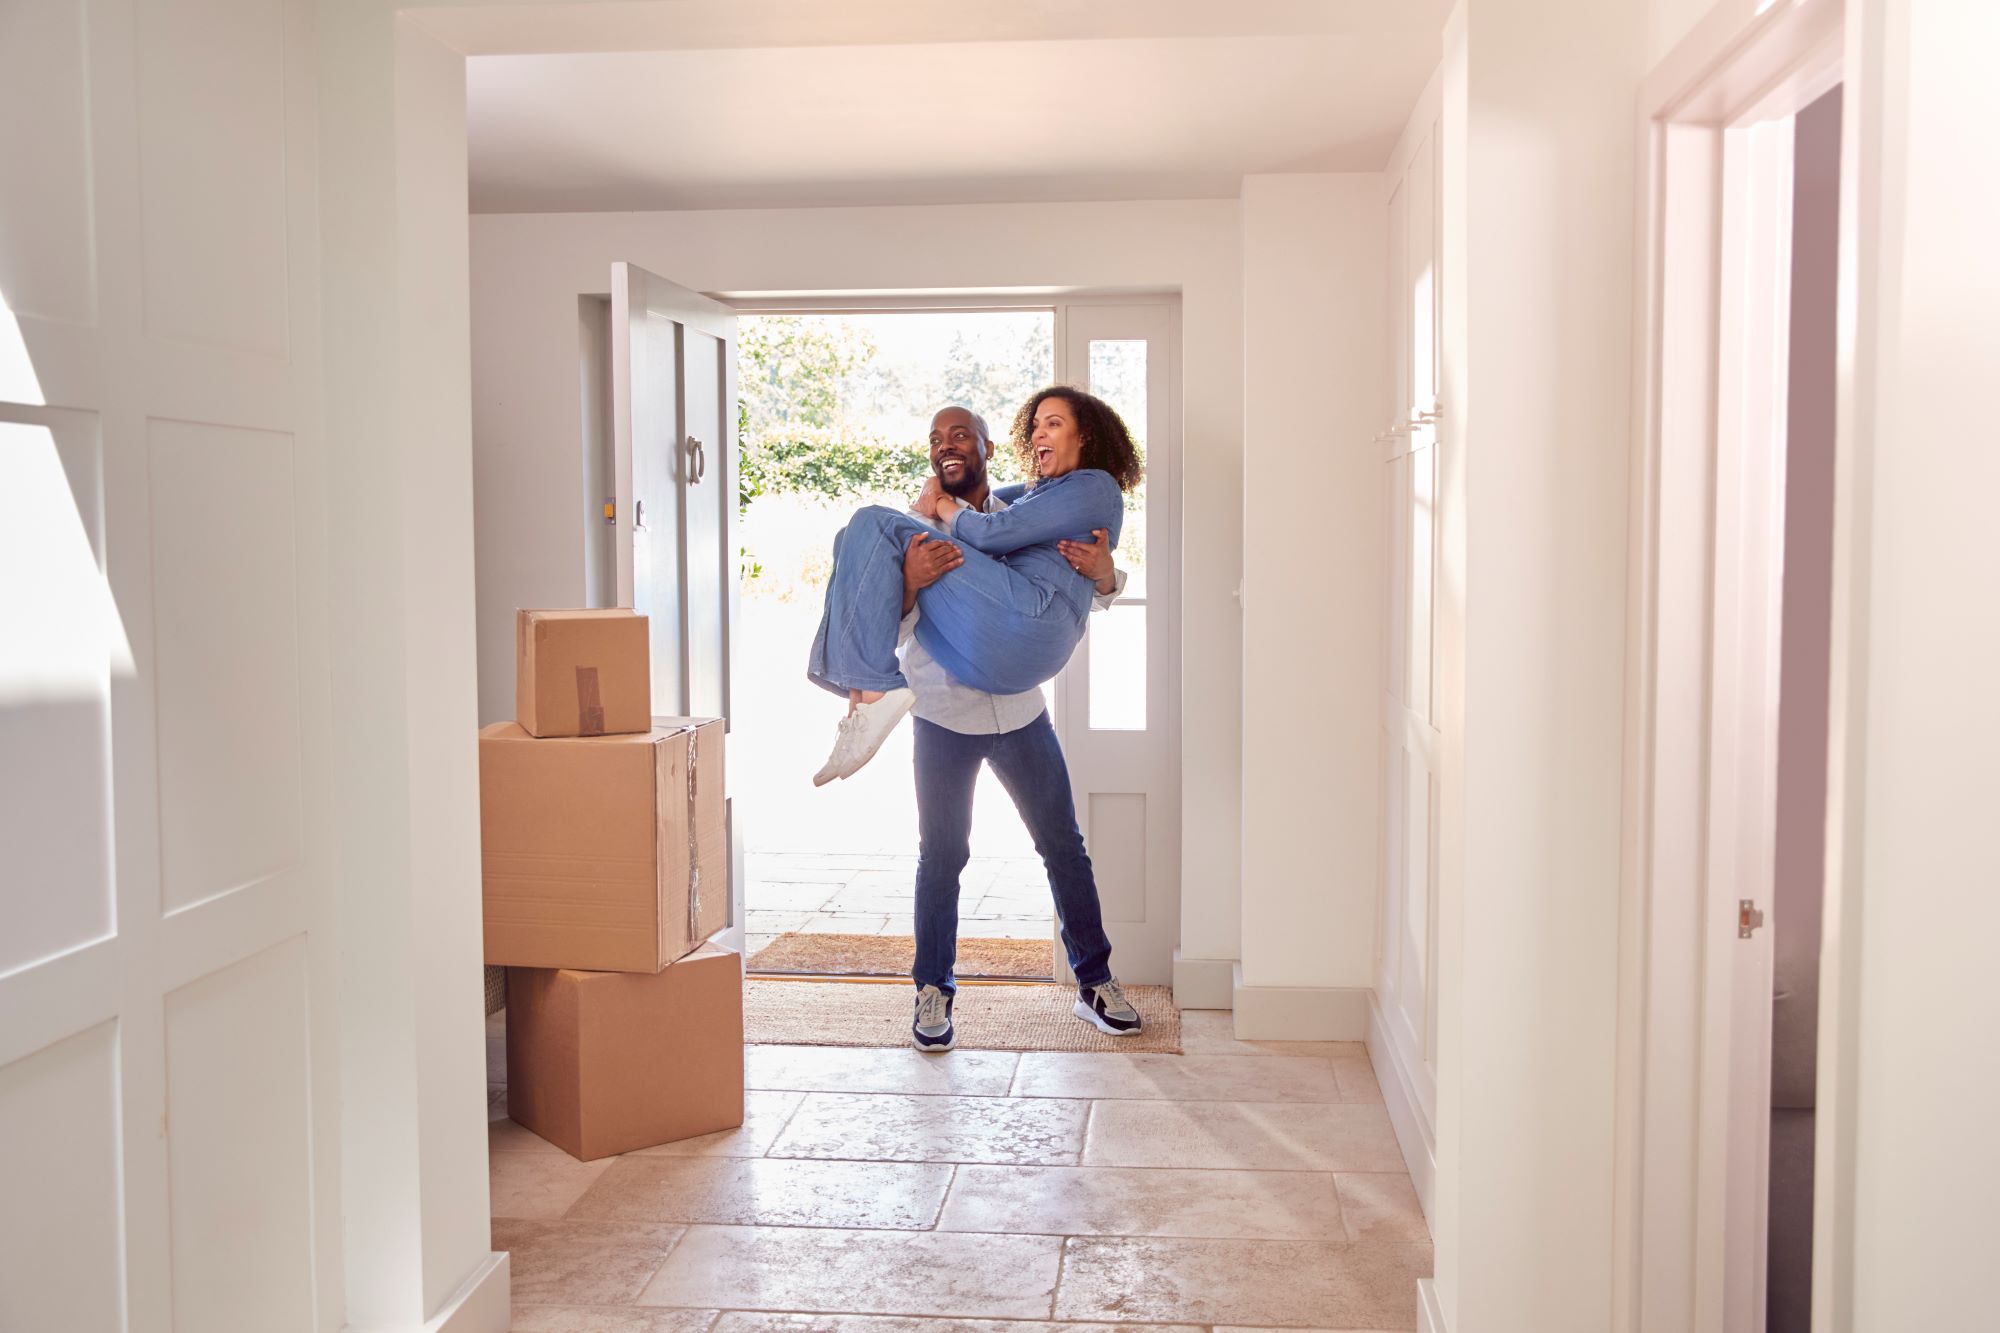 6 Things to Do When You Move Into a New House